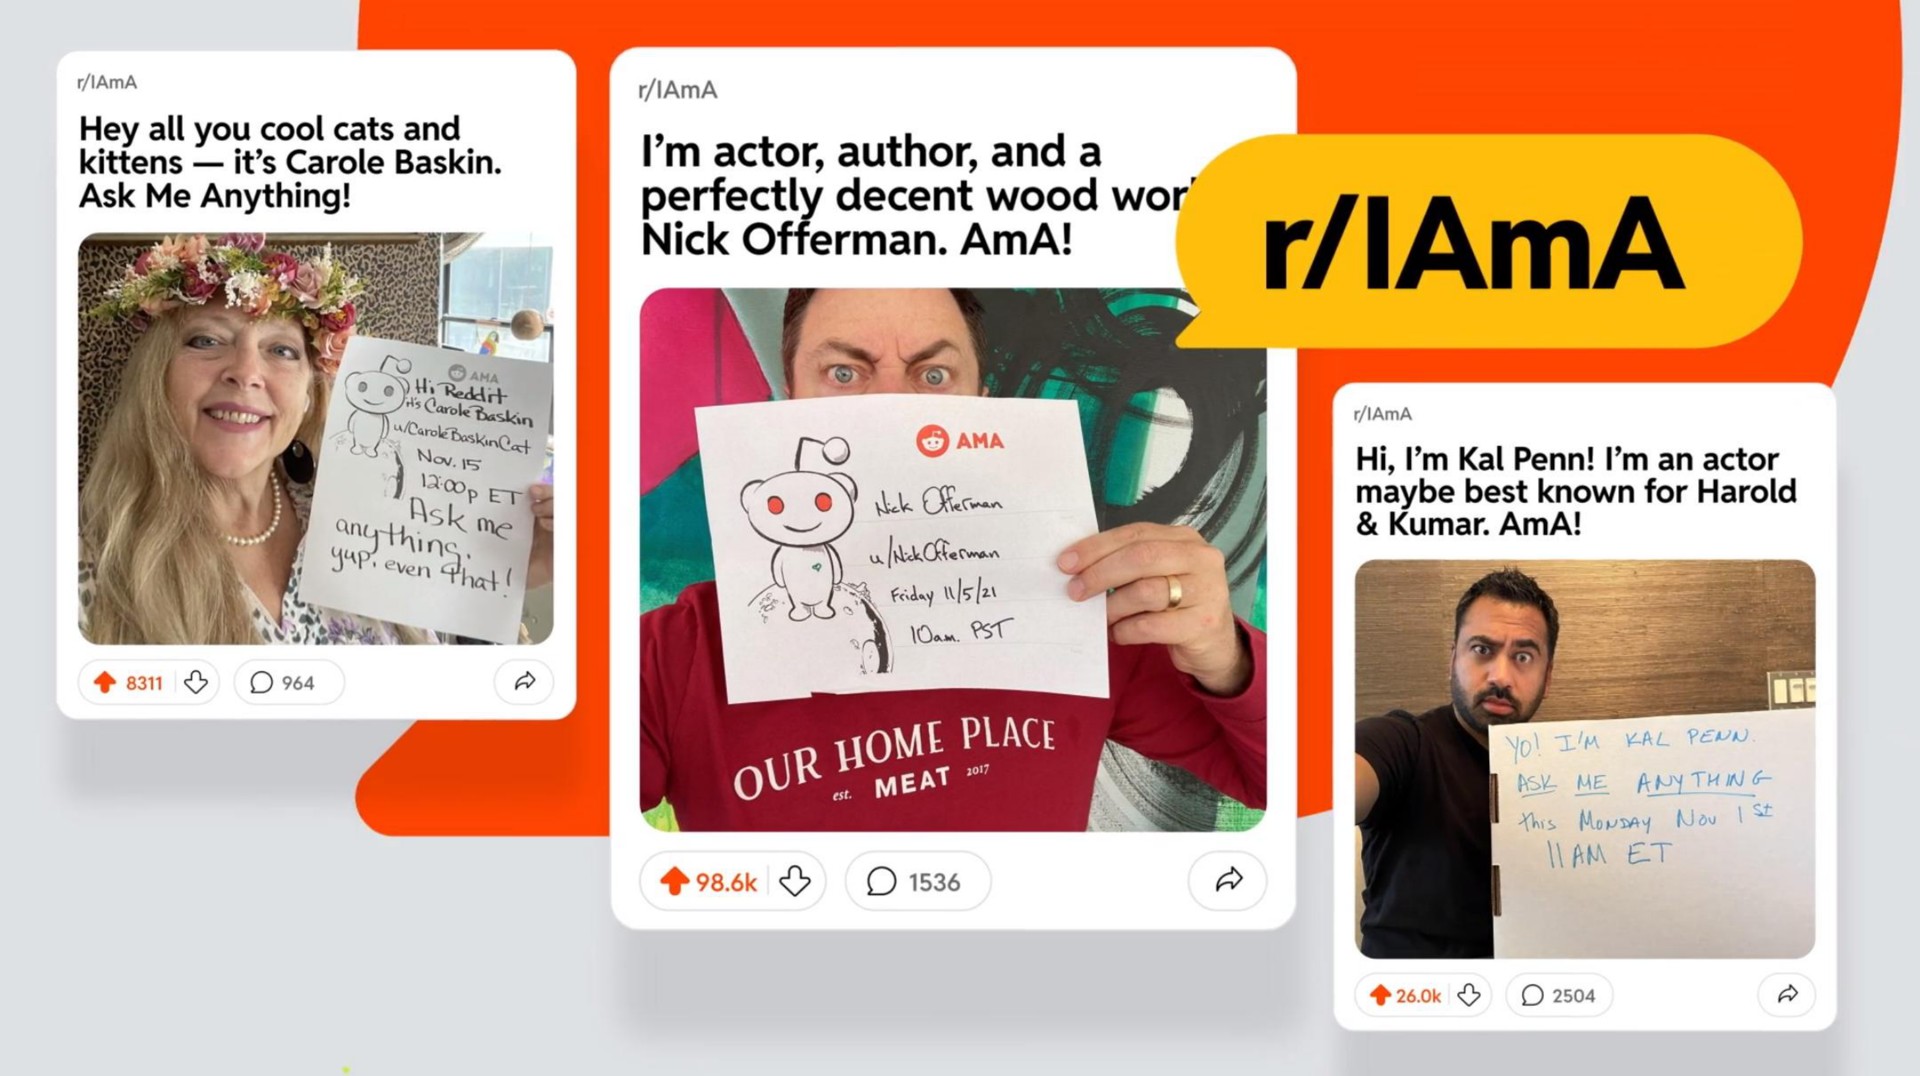 hey all you cool cats and kittens it ask me anything i actor author and a perfectly decent wood nick ama even at lama i i an actor maybe best known for ama | Reddit